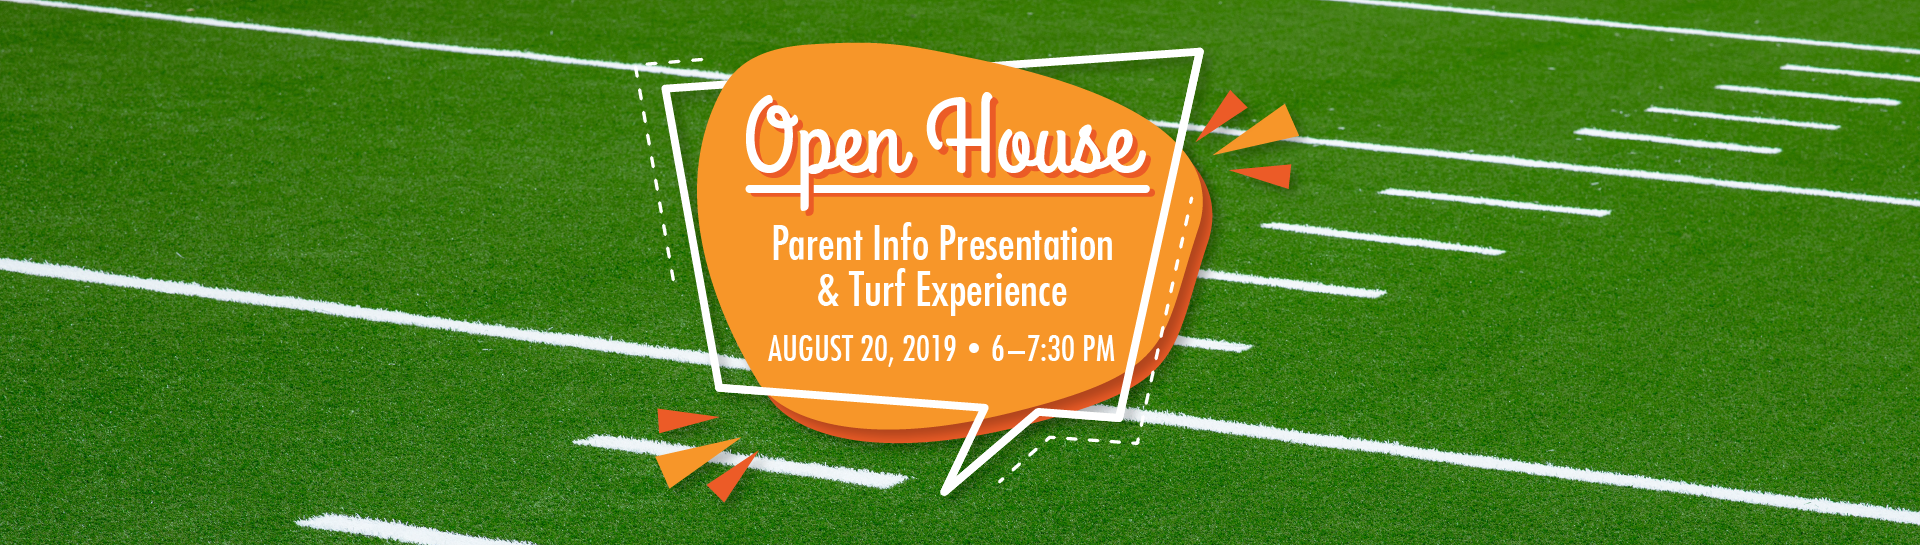 Open House Parent Info Presentation and Turf Experience - August 20